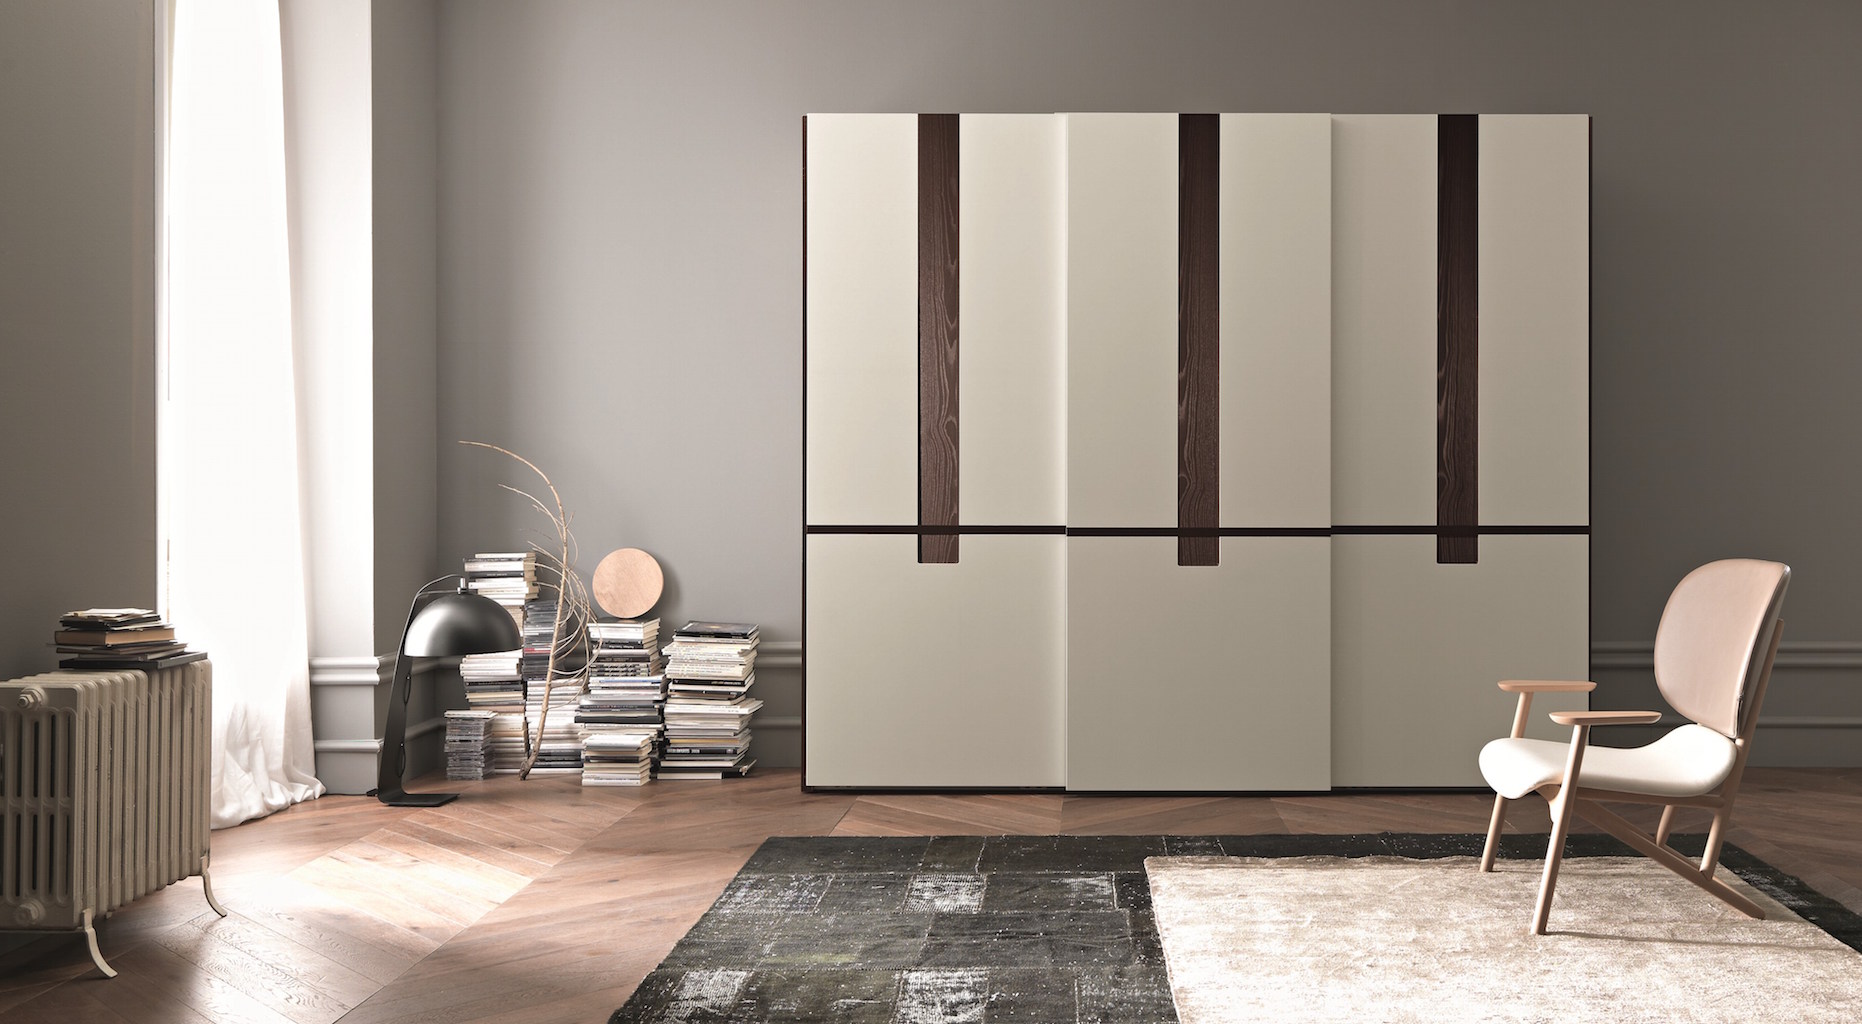 White-Lacquer-Modern-Wardrobe-Design-Come-With-Wooden-Material-Wardrobe-For-Bedroom-Design